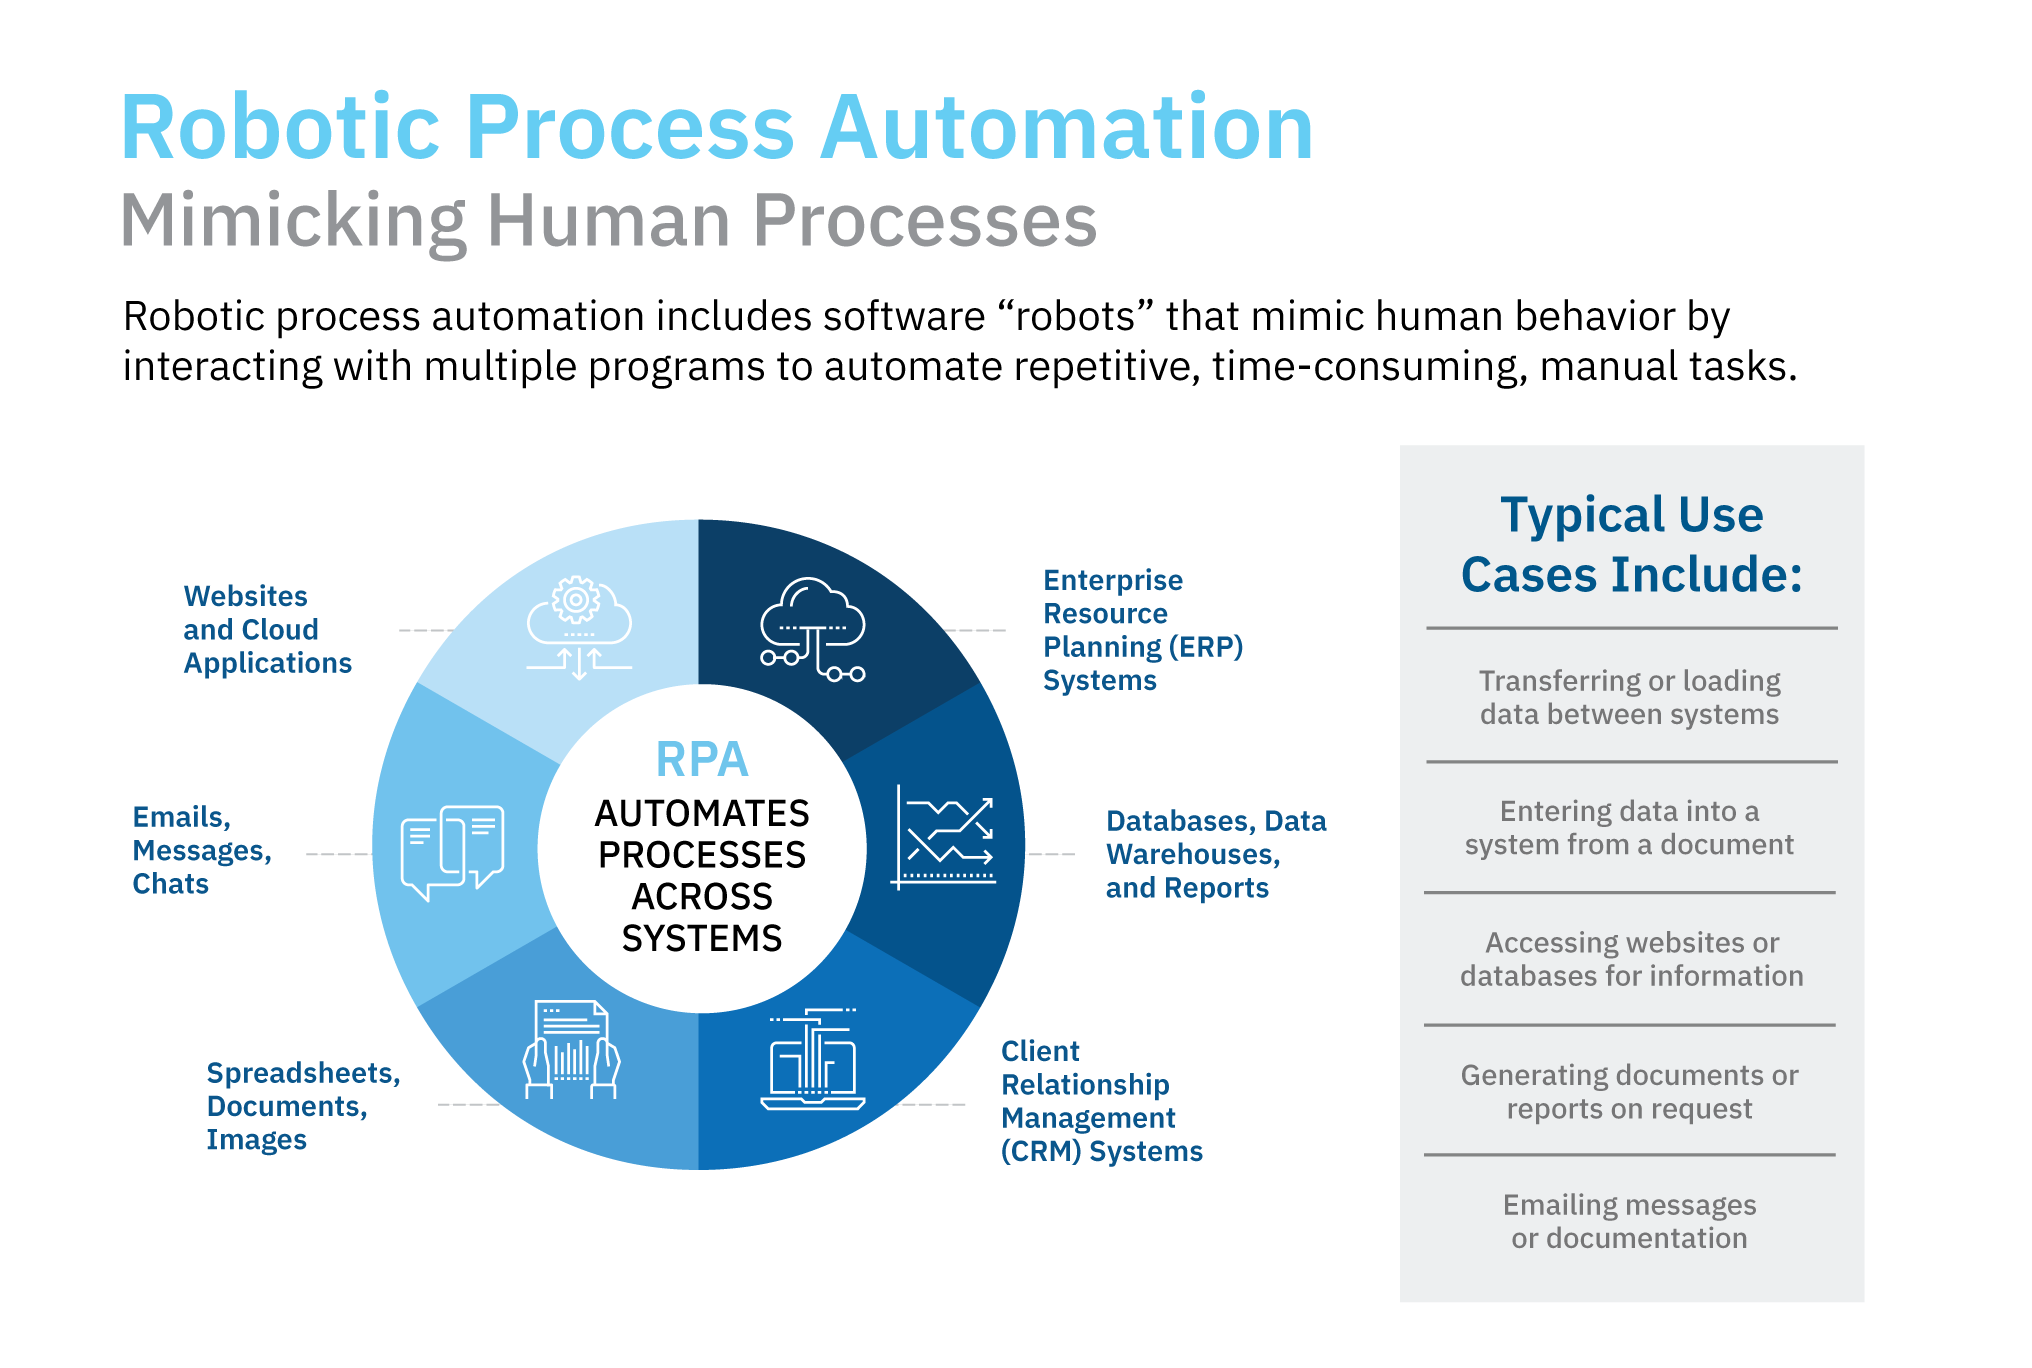 A complex graphic showing RPA use cases